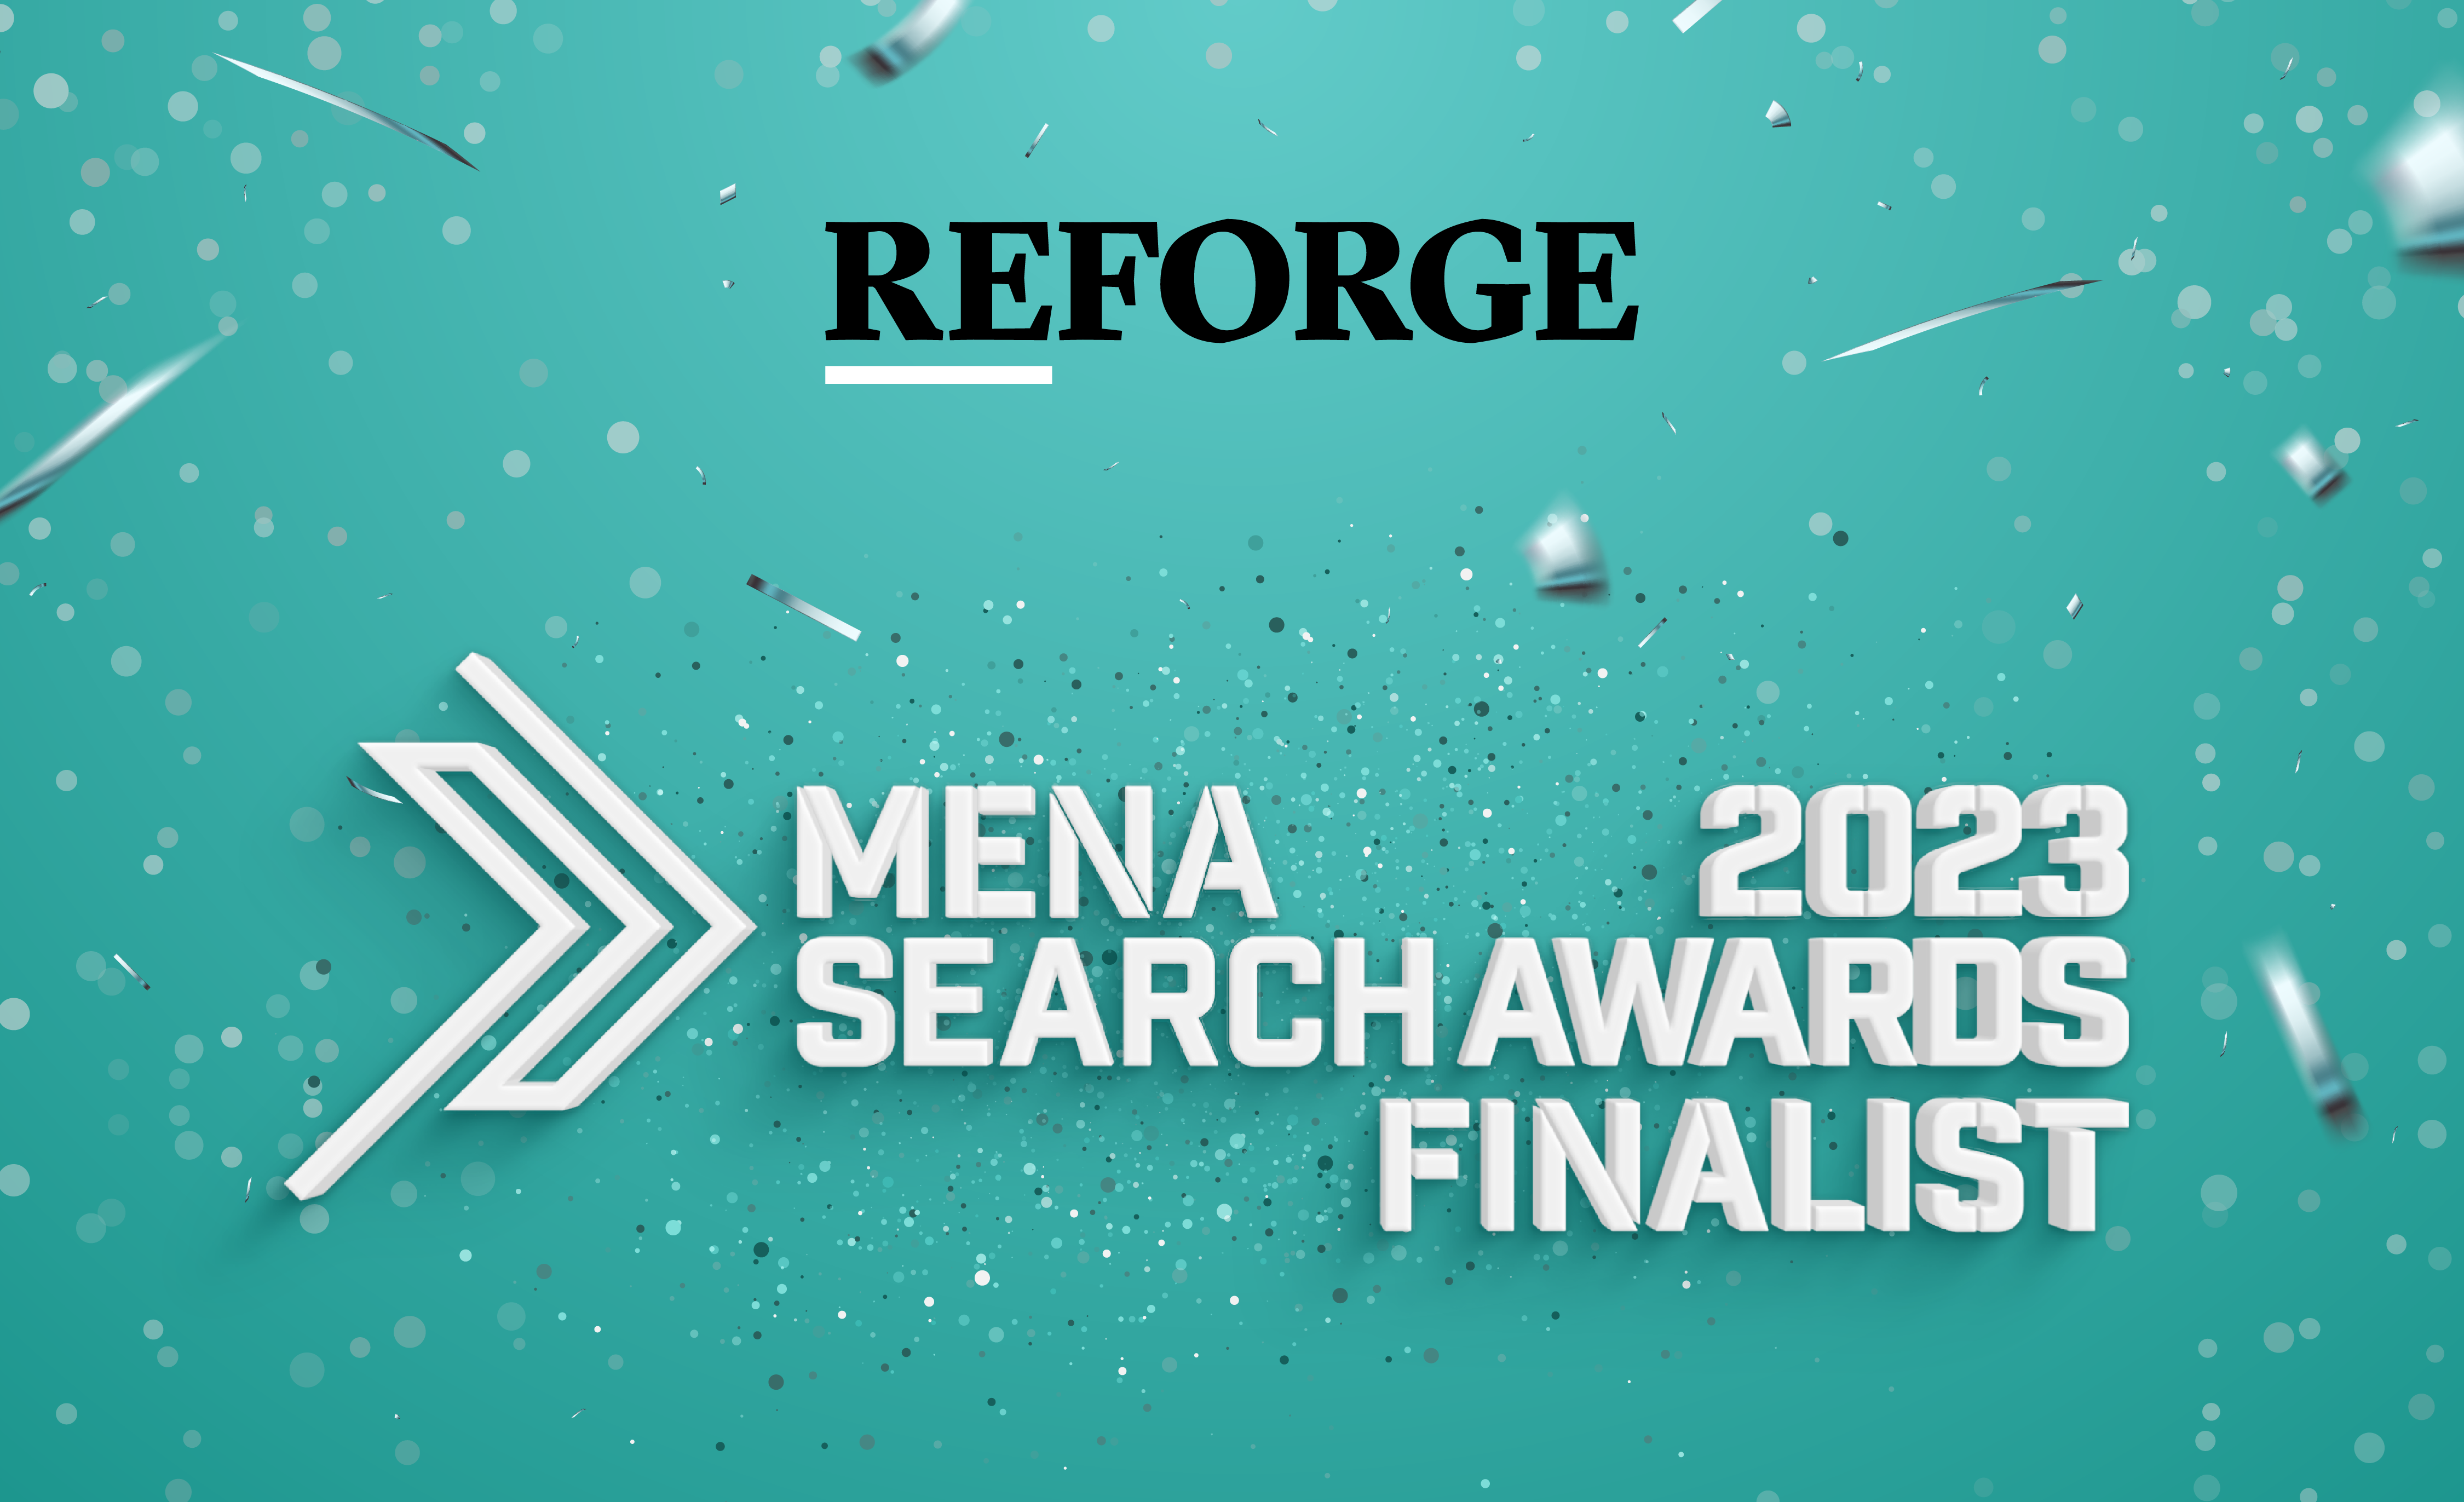 Image: Reforge digital receives nomination for – Best Arabic SEO Campaign – at the MENA search awards.